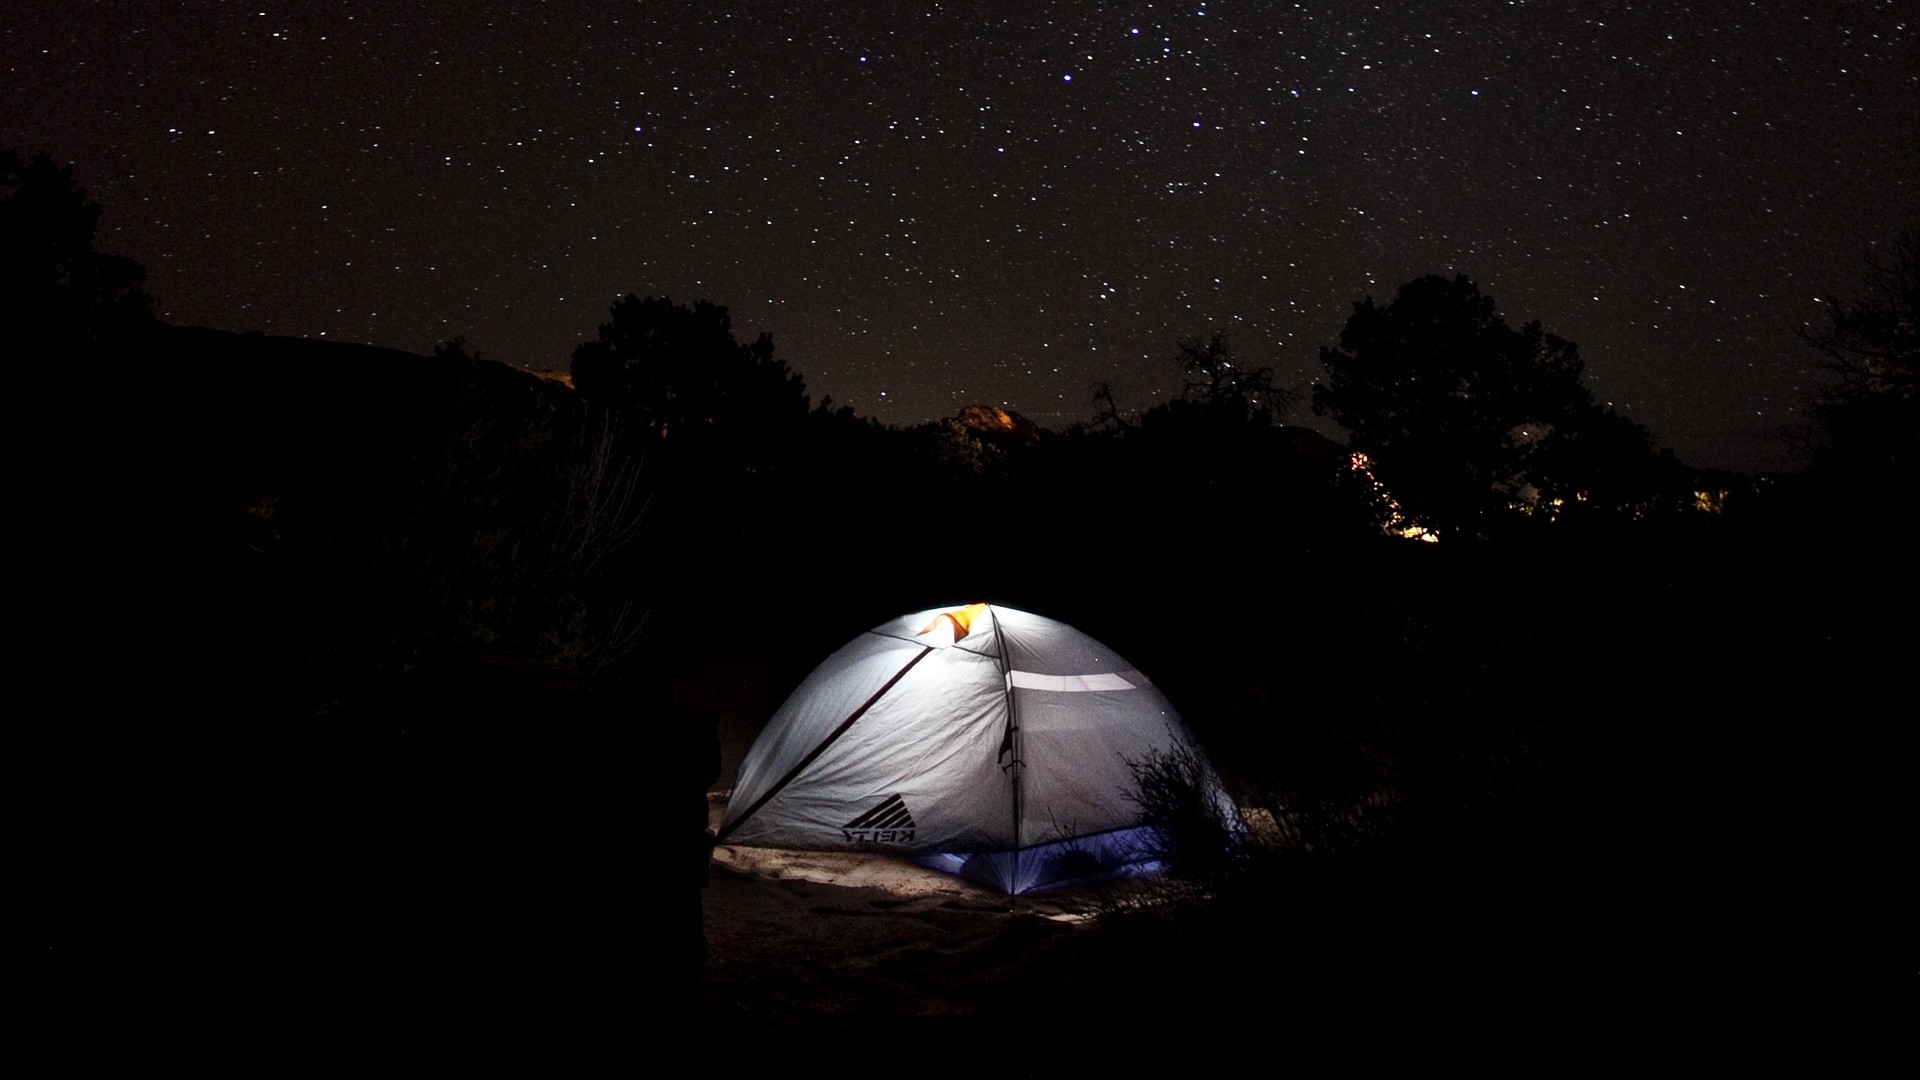 1920x1080 wallpapers: tent, starry sky, camping, night (image)